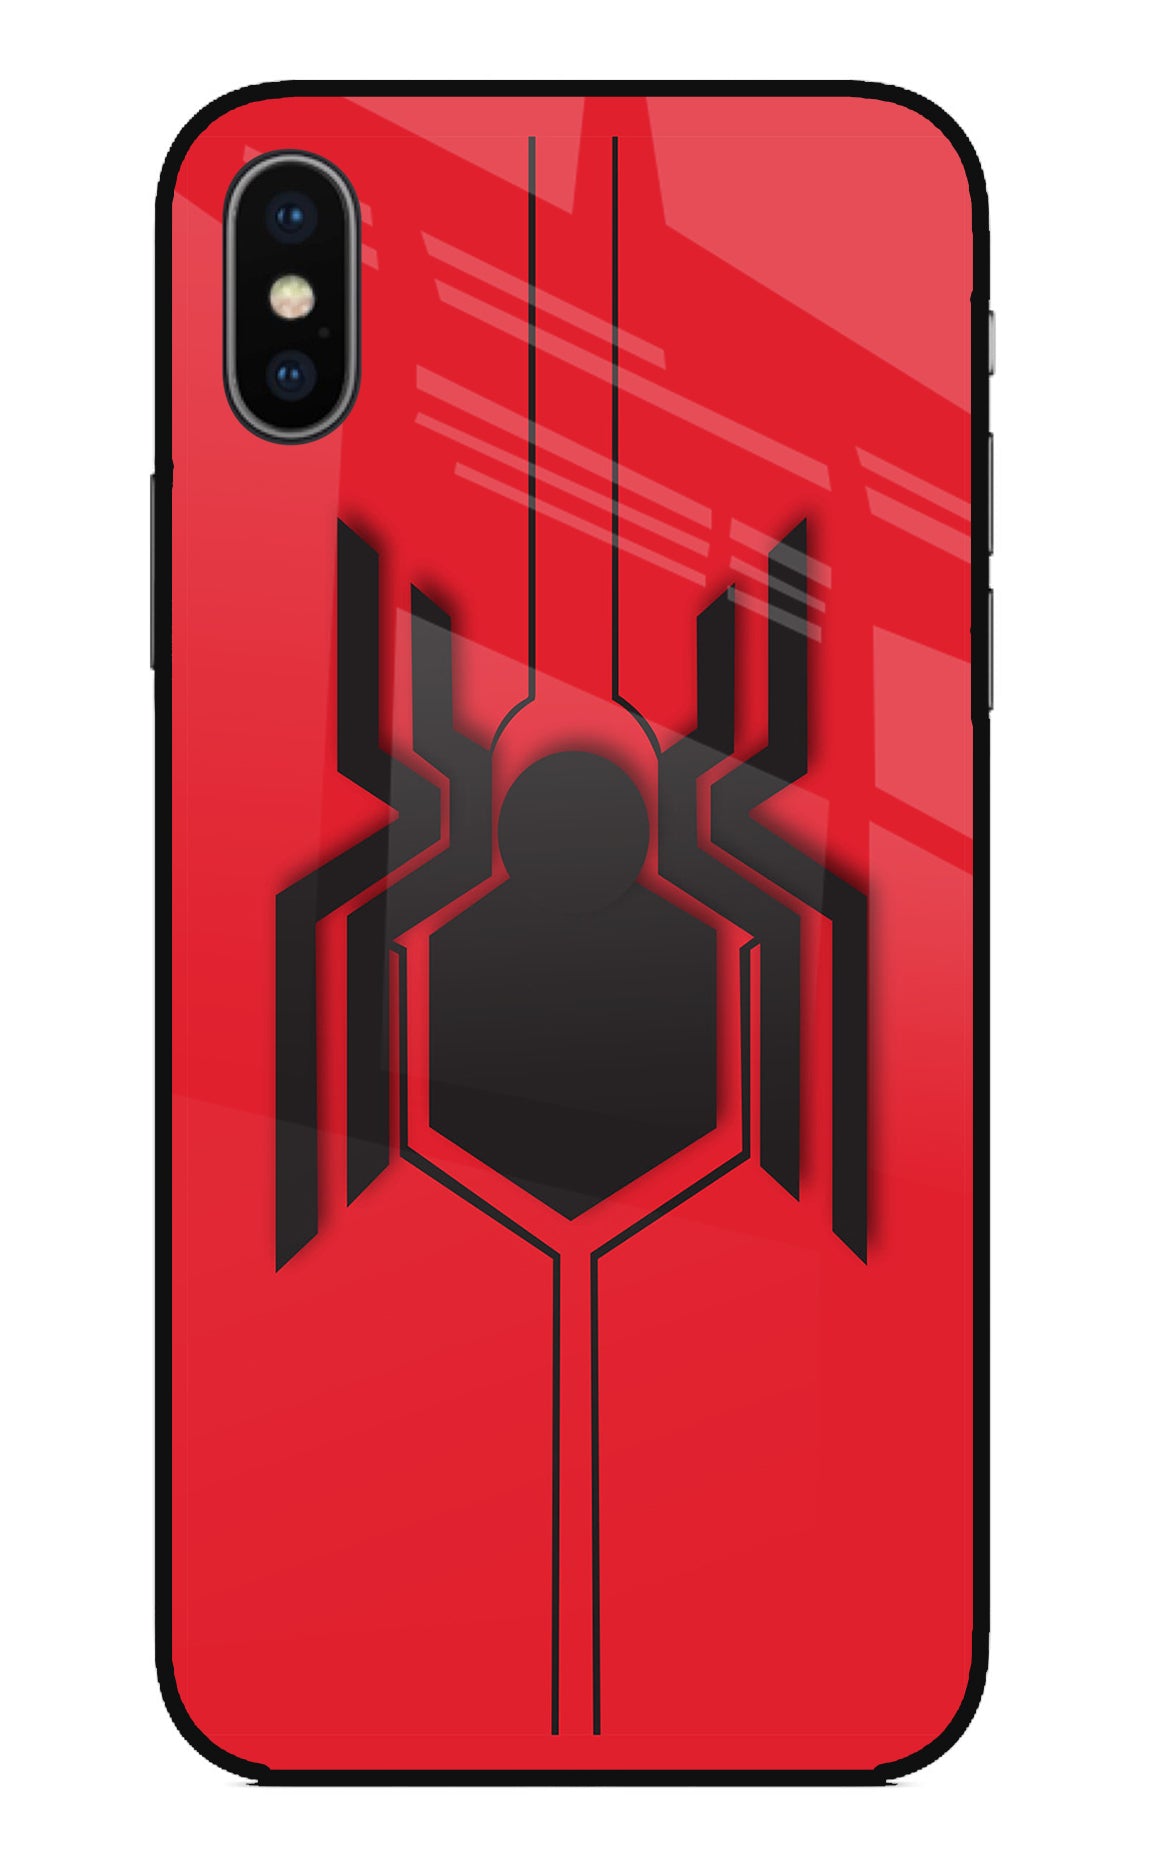 Spider iPhone X Back Cover